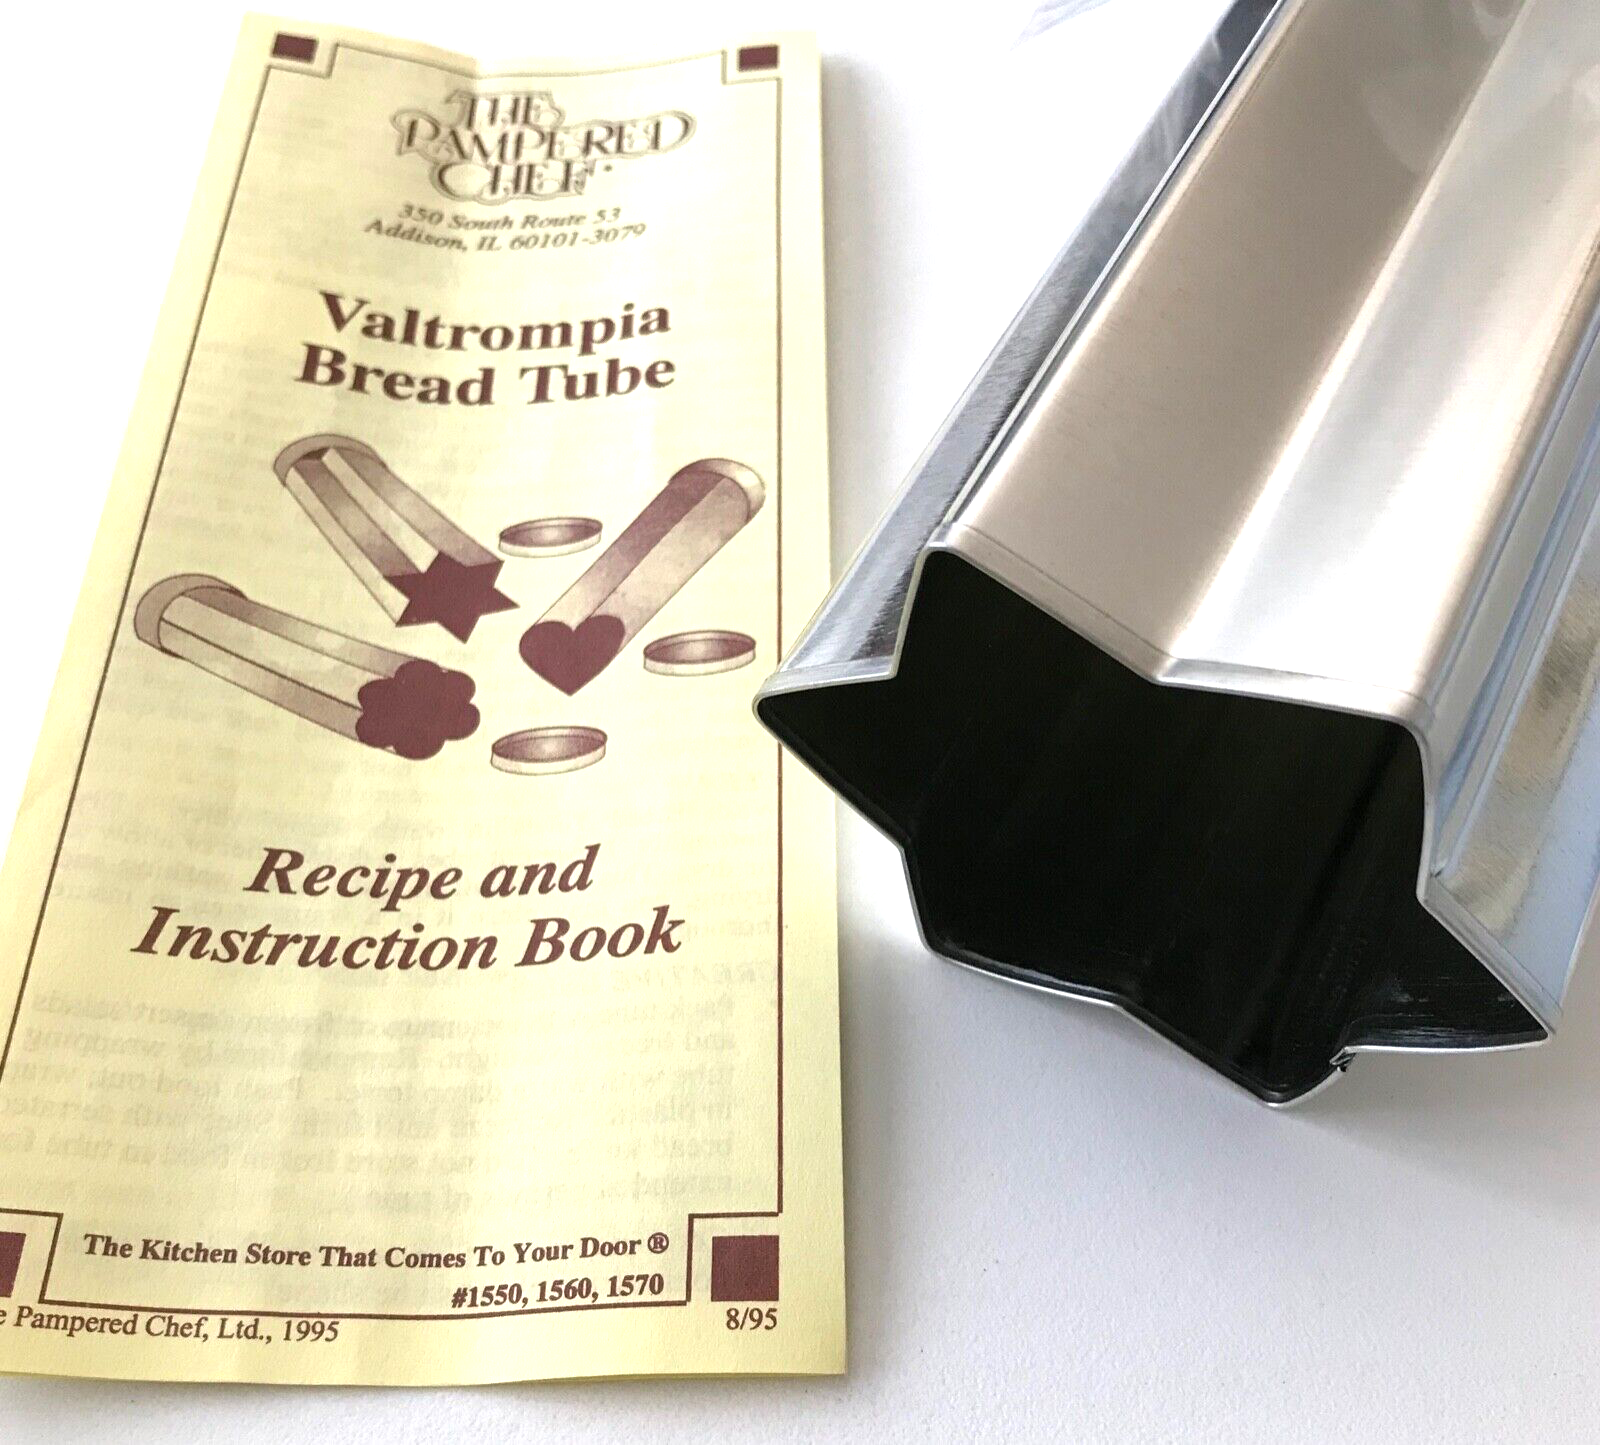 Primary image for Pampered Chef Bread Tube Star Shaped Valtrompia Recipe Instruction Book New Box